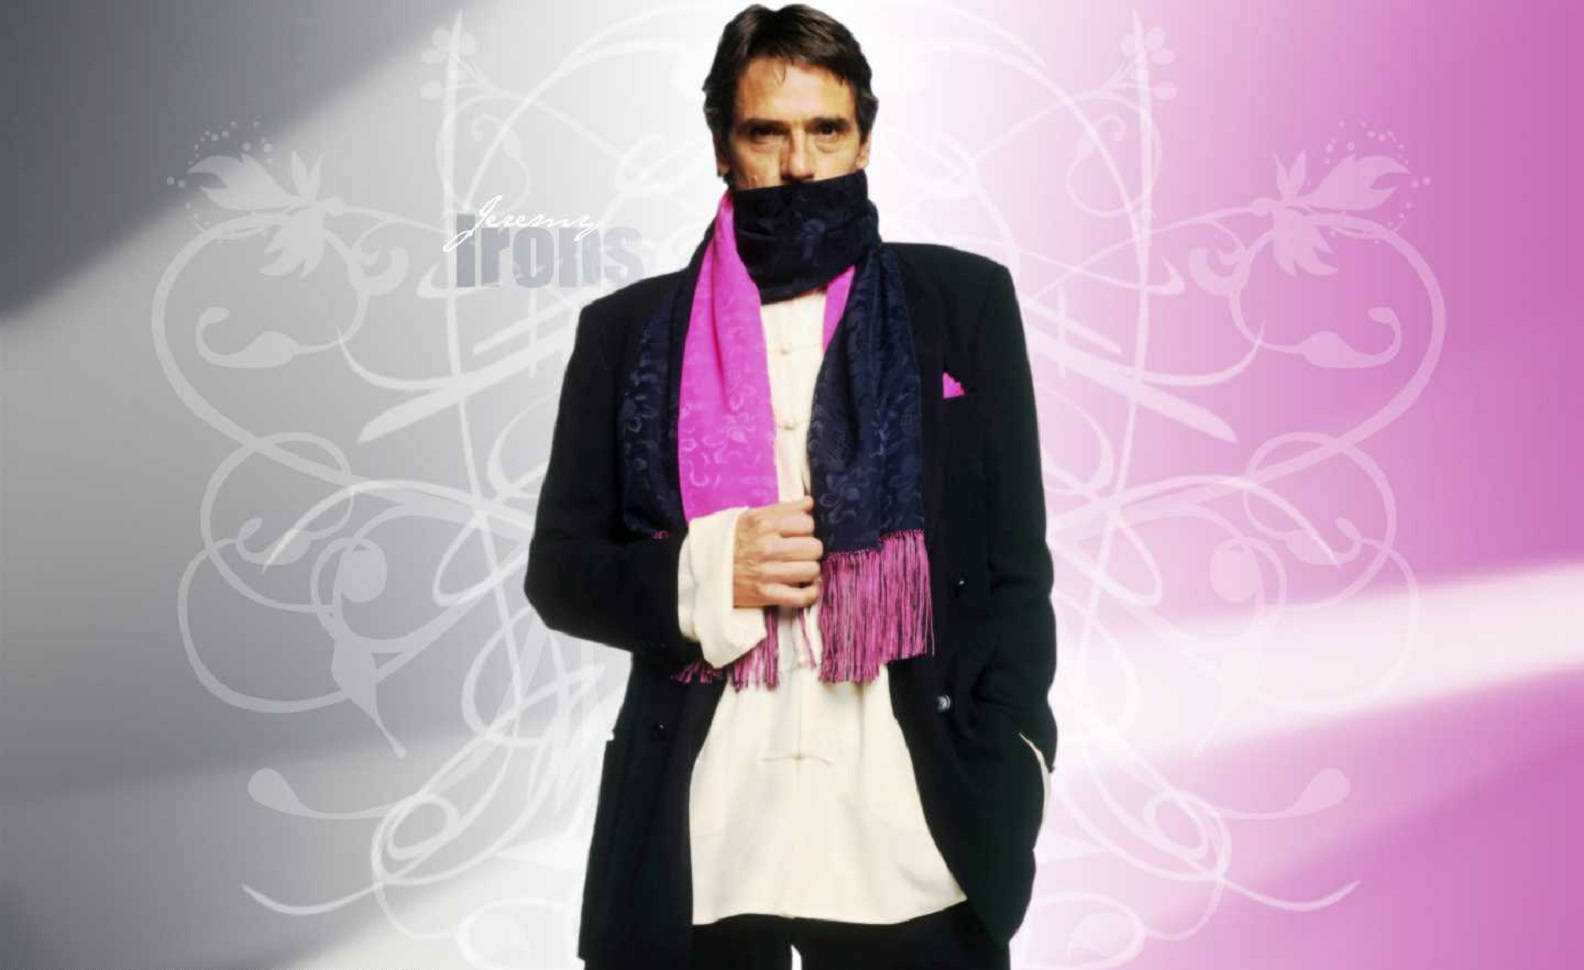 Jeremyirons Med En Rosa Halsduk. (this Sentence Would Work As A Description For A Wallpaper Featuring Jeremy Irons Wearing A Pink Scarf.) Wallpaper